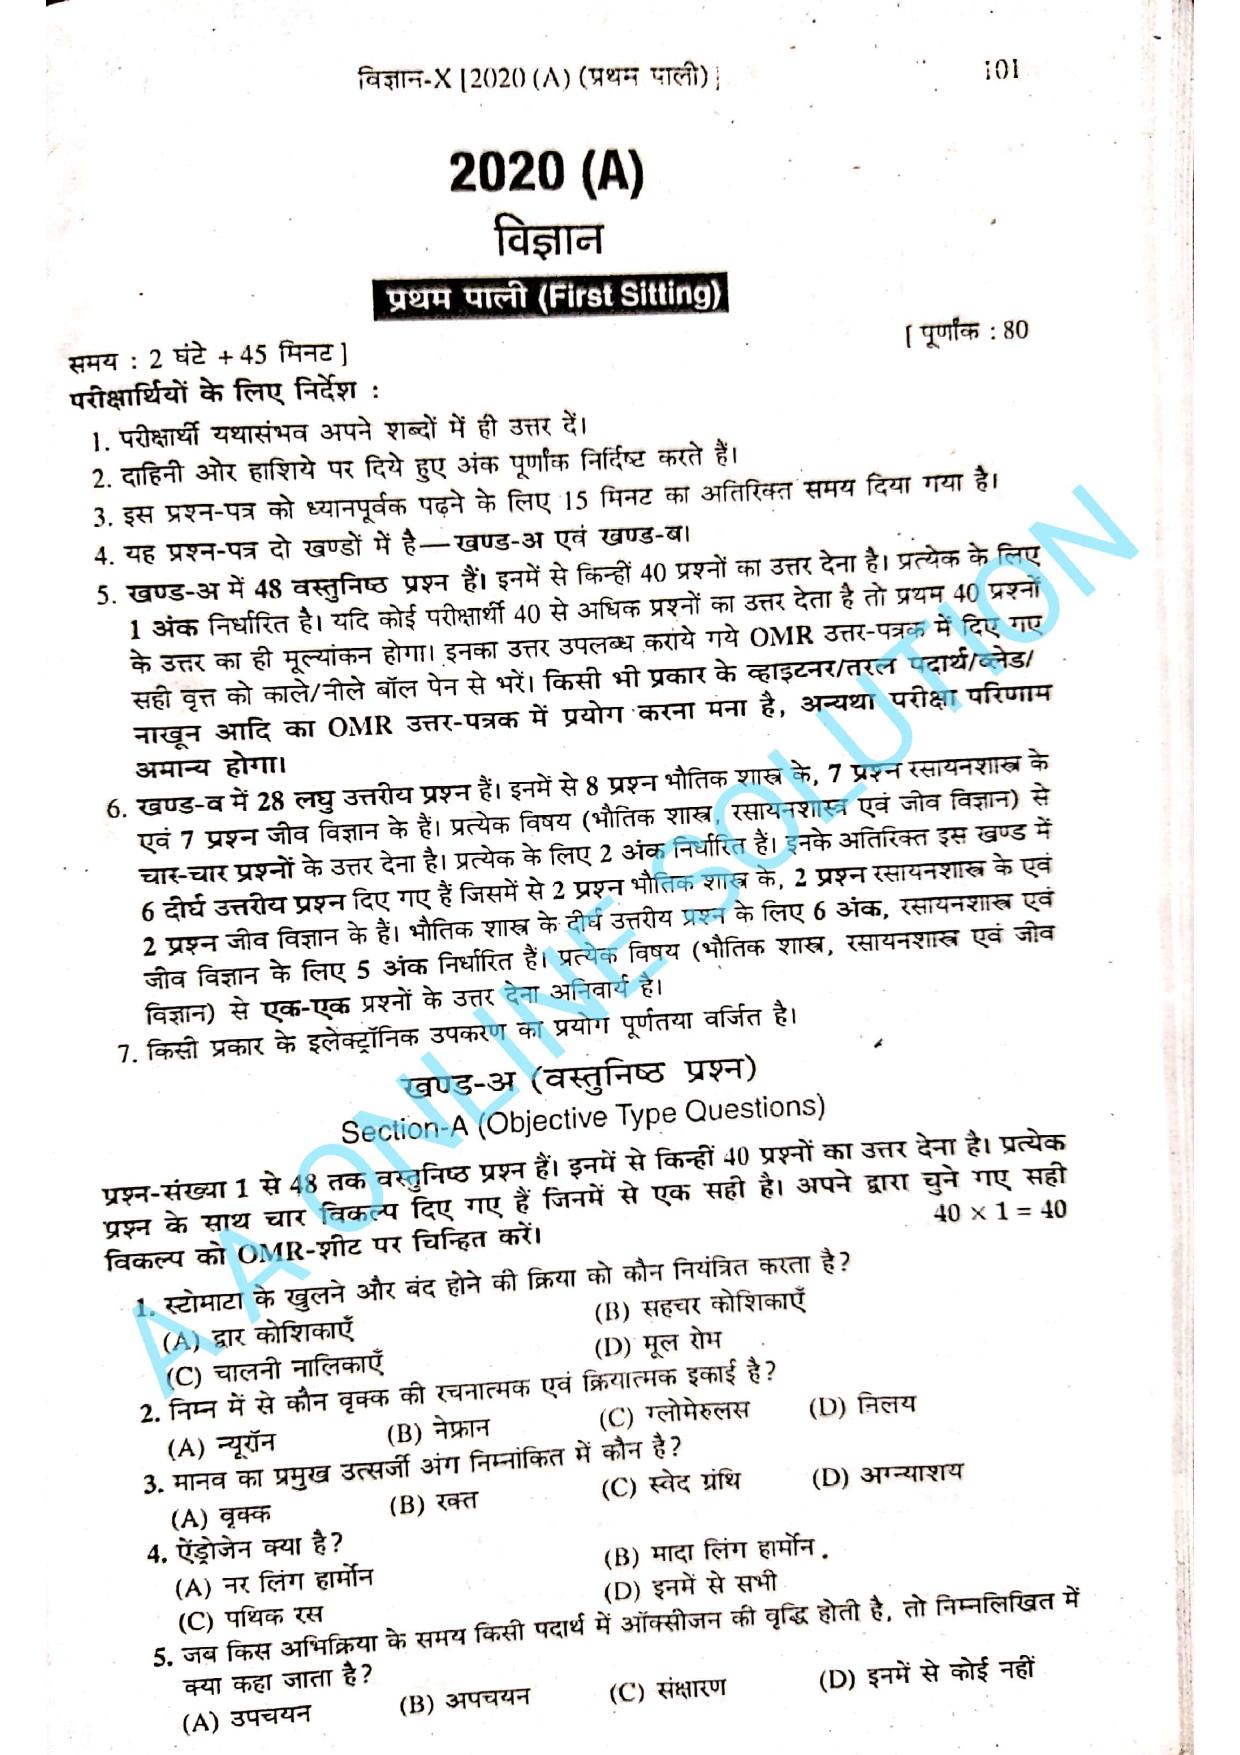 Bihar Board Class 10 Science 2020 (1st Sitting) Question Paper - Page 1